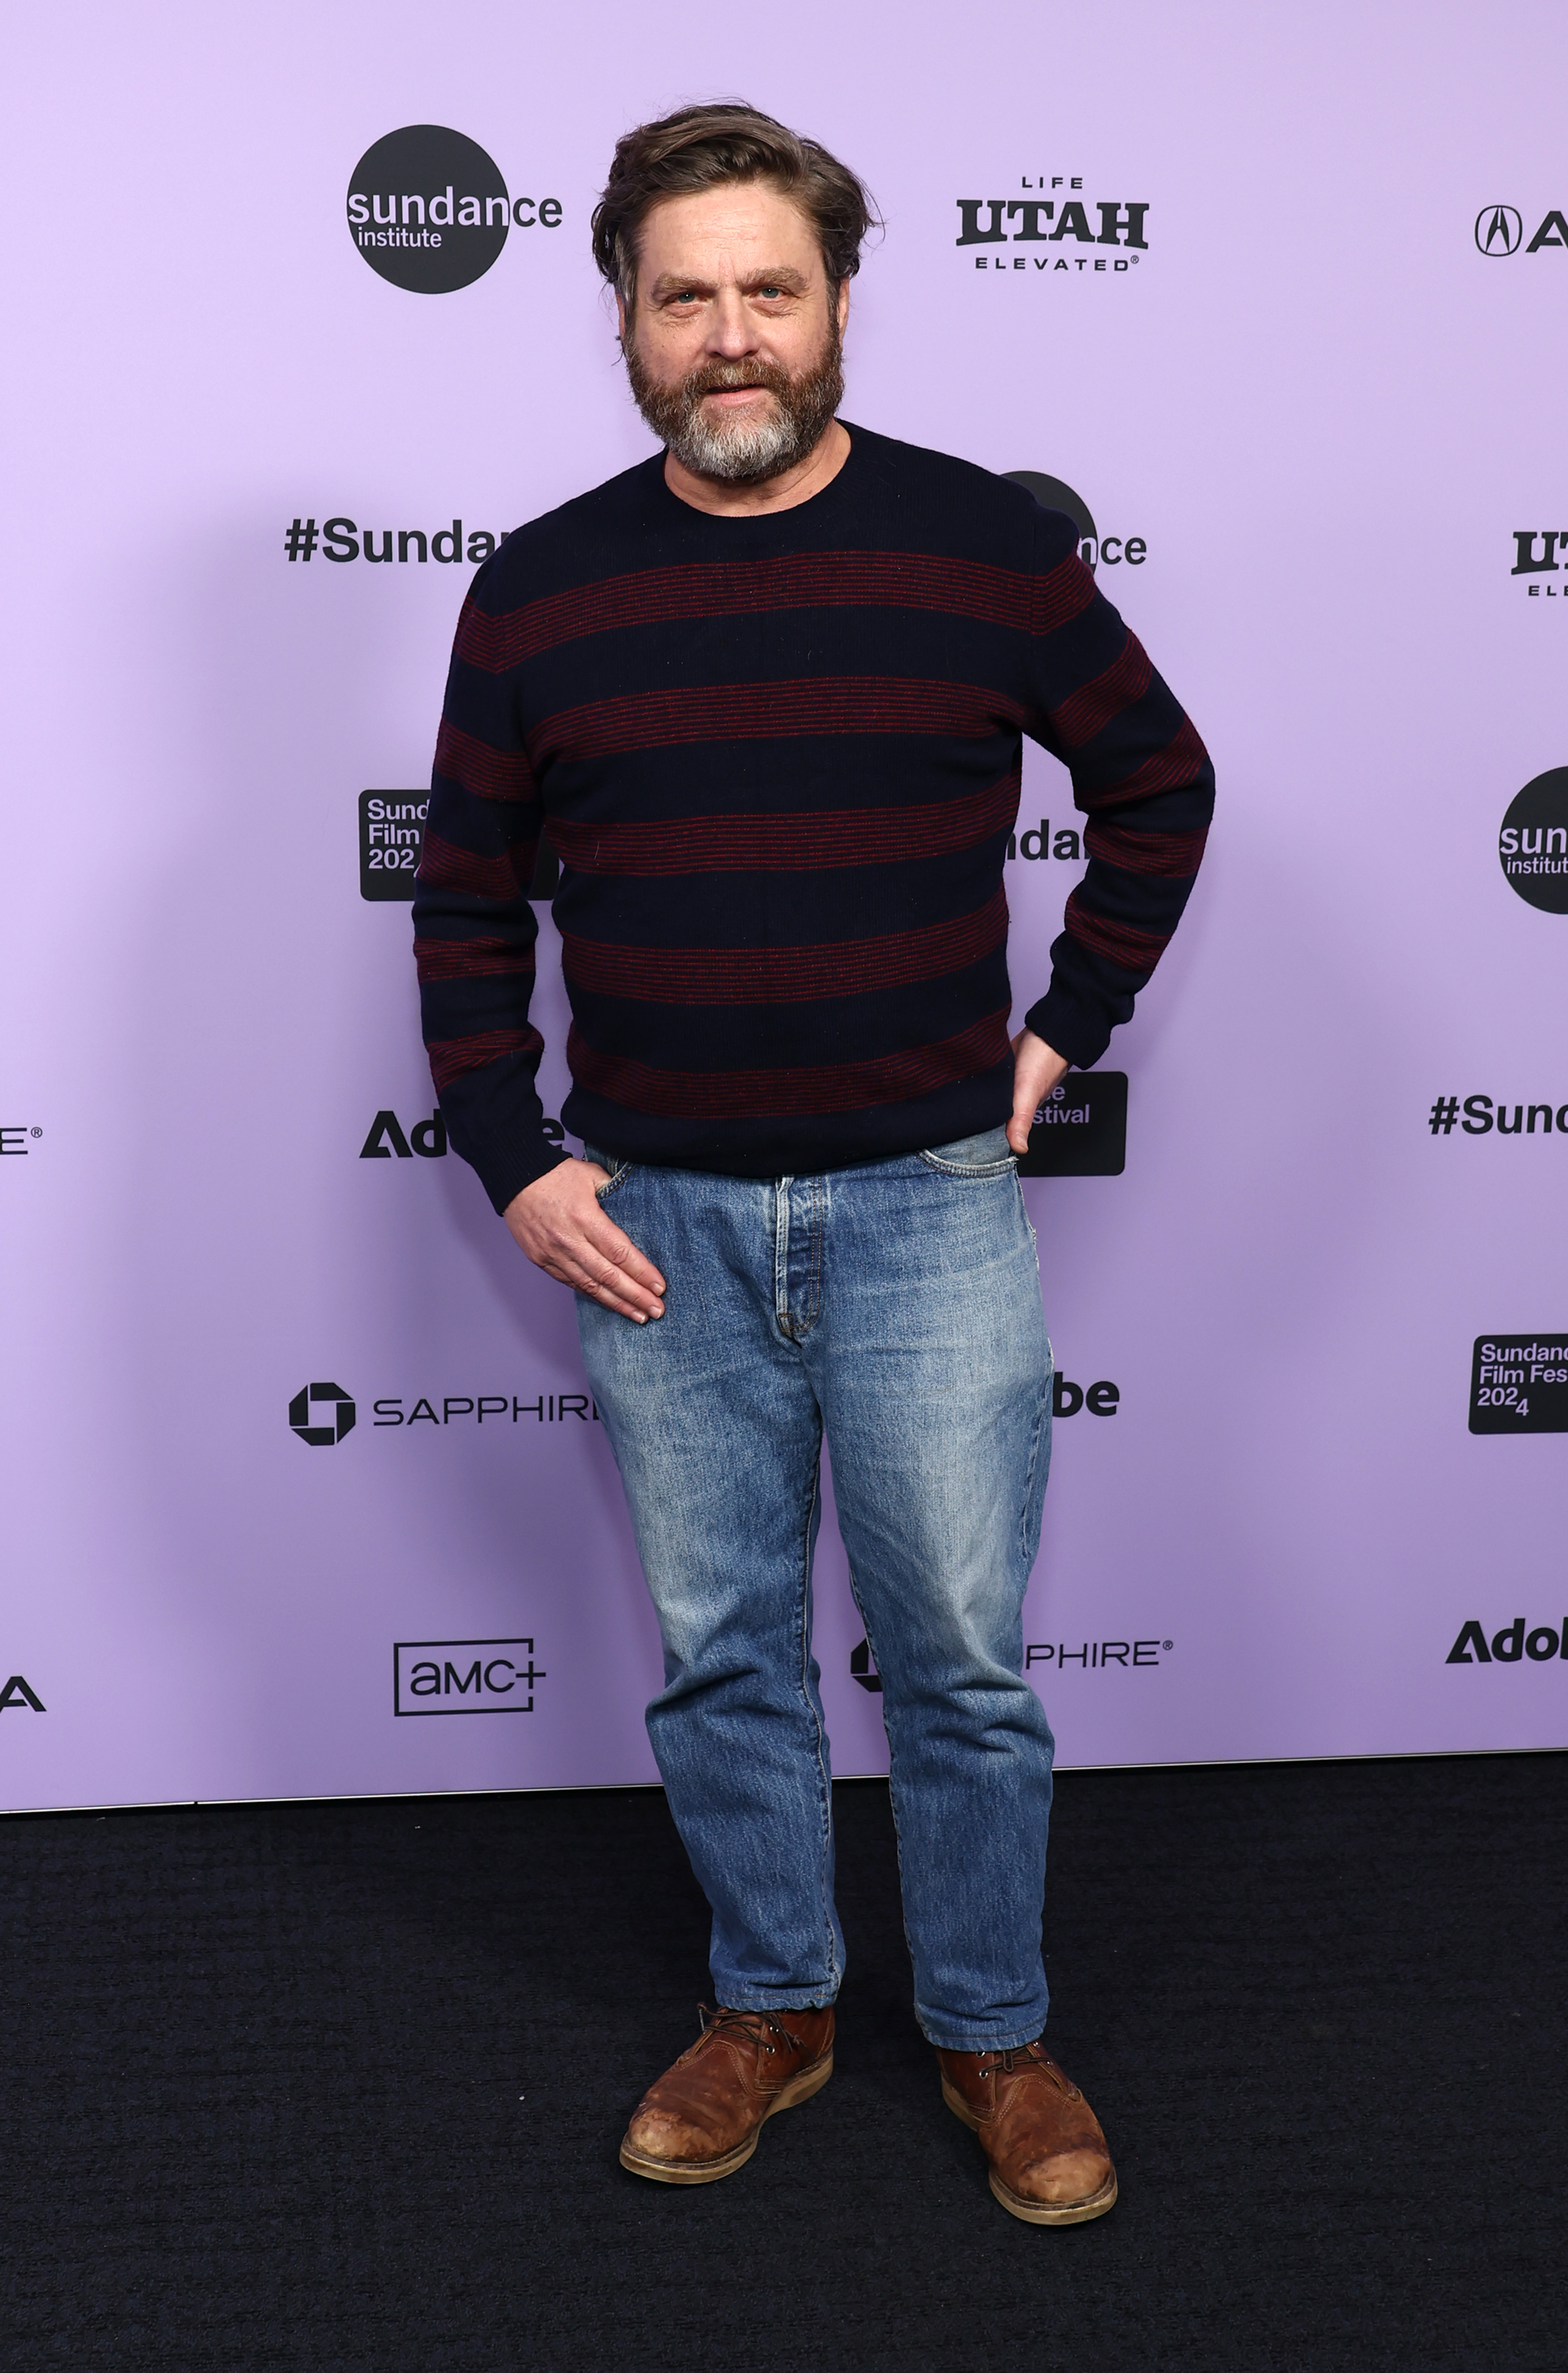 Zach Galifianakis at the "Winner" premiere during the Sundance Film Festival in Park City, Utah, on January 20, 2024. | Source: Getty Images